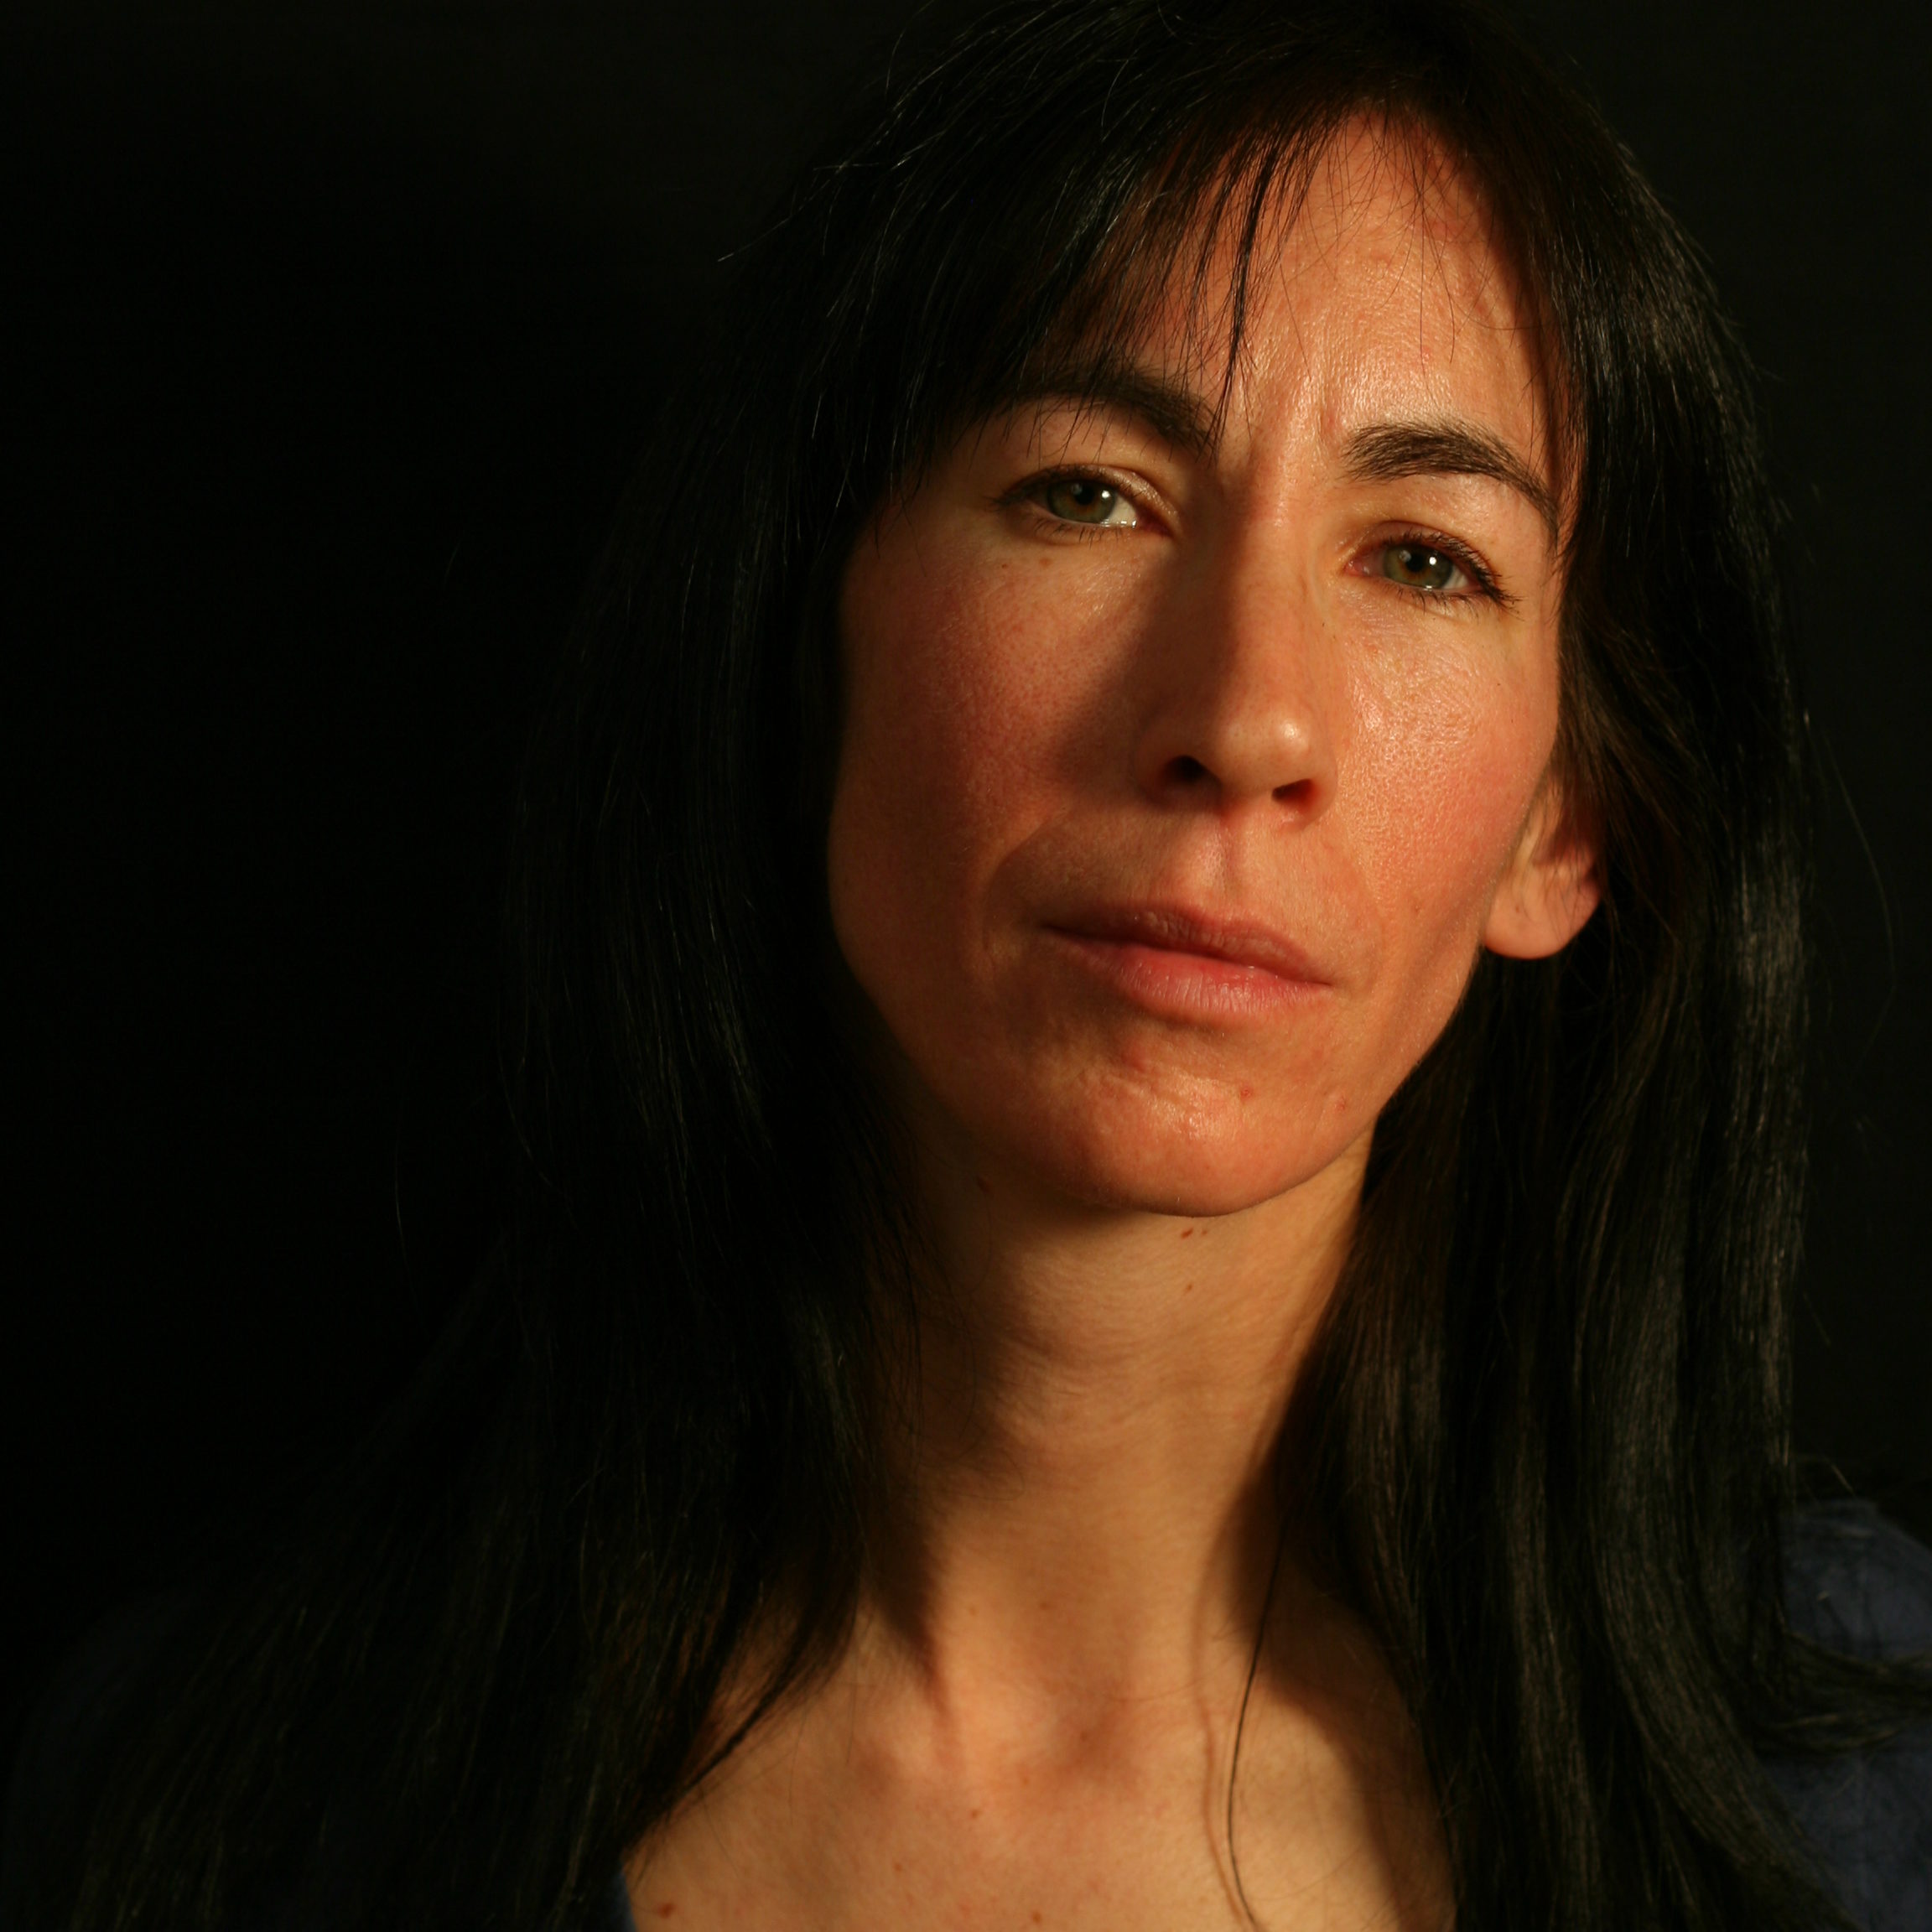 Photo portrait of a woman with dark hair in front on a dark background.